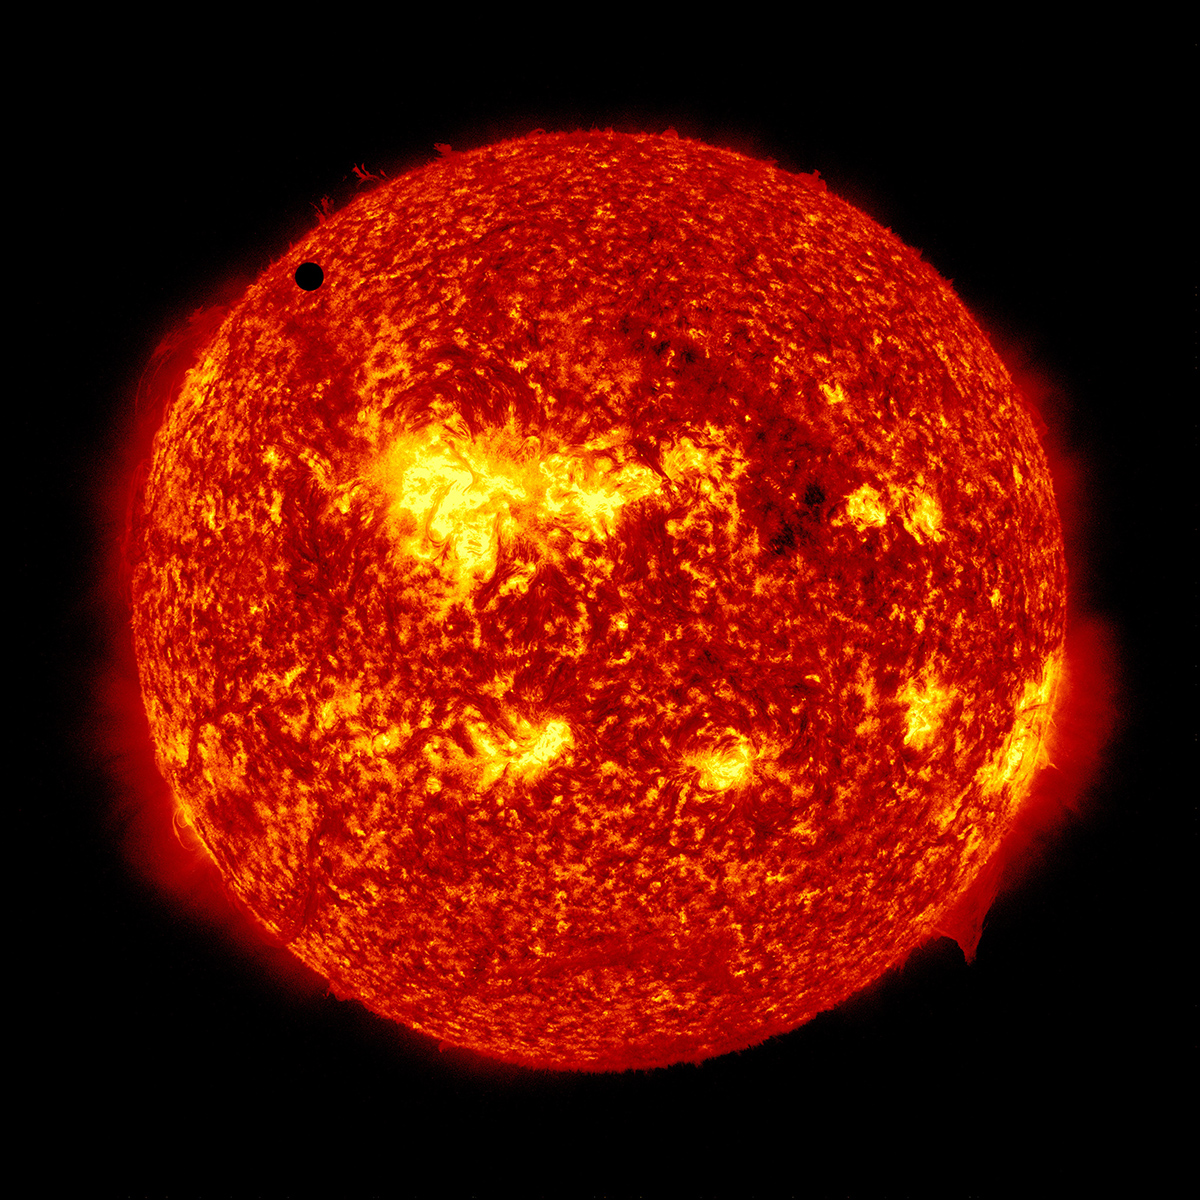 On June 5 2012, SDO collected images of the rarest predictable solar event—the transit of Venus across the face of the sun.